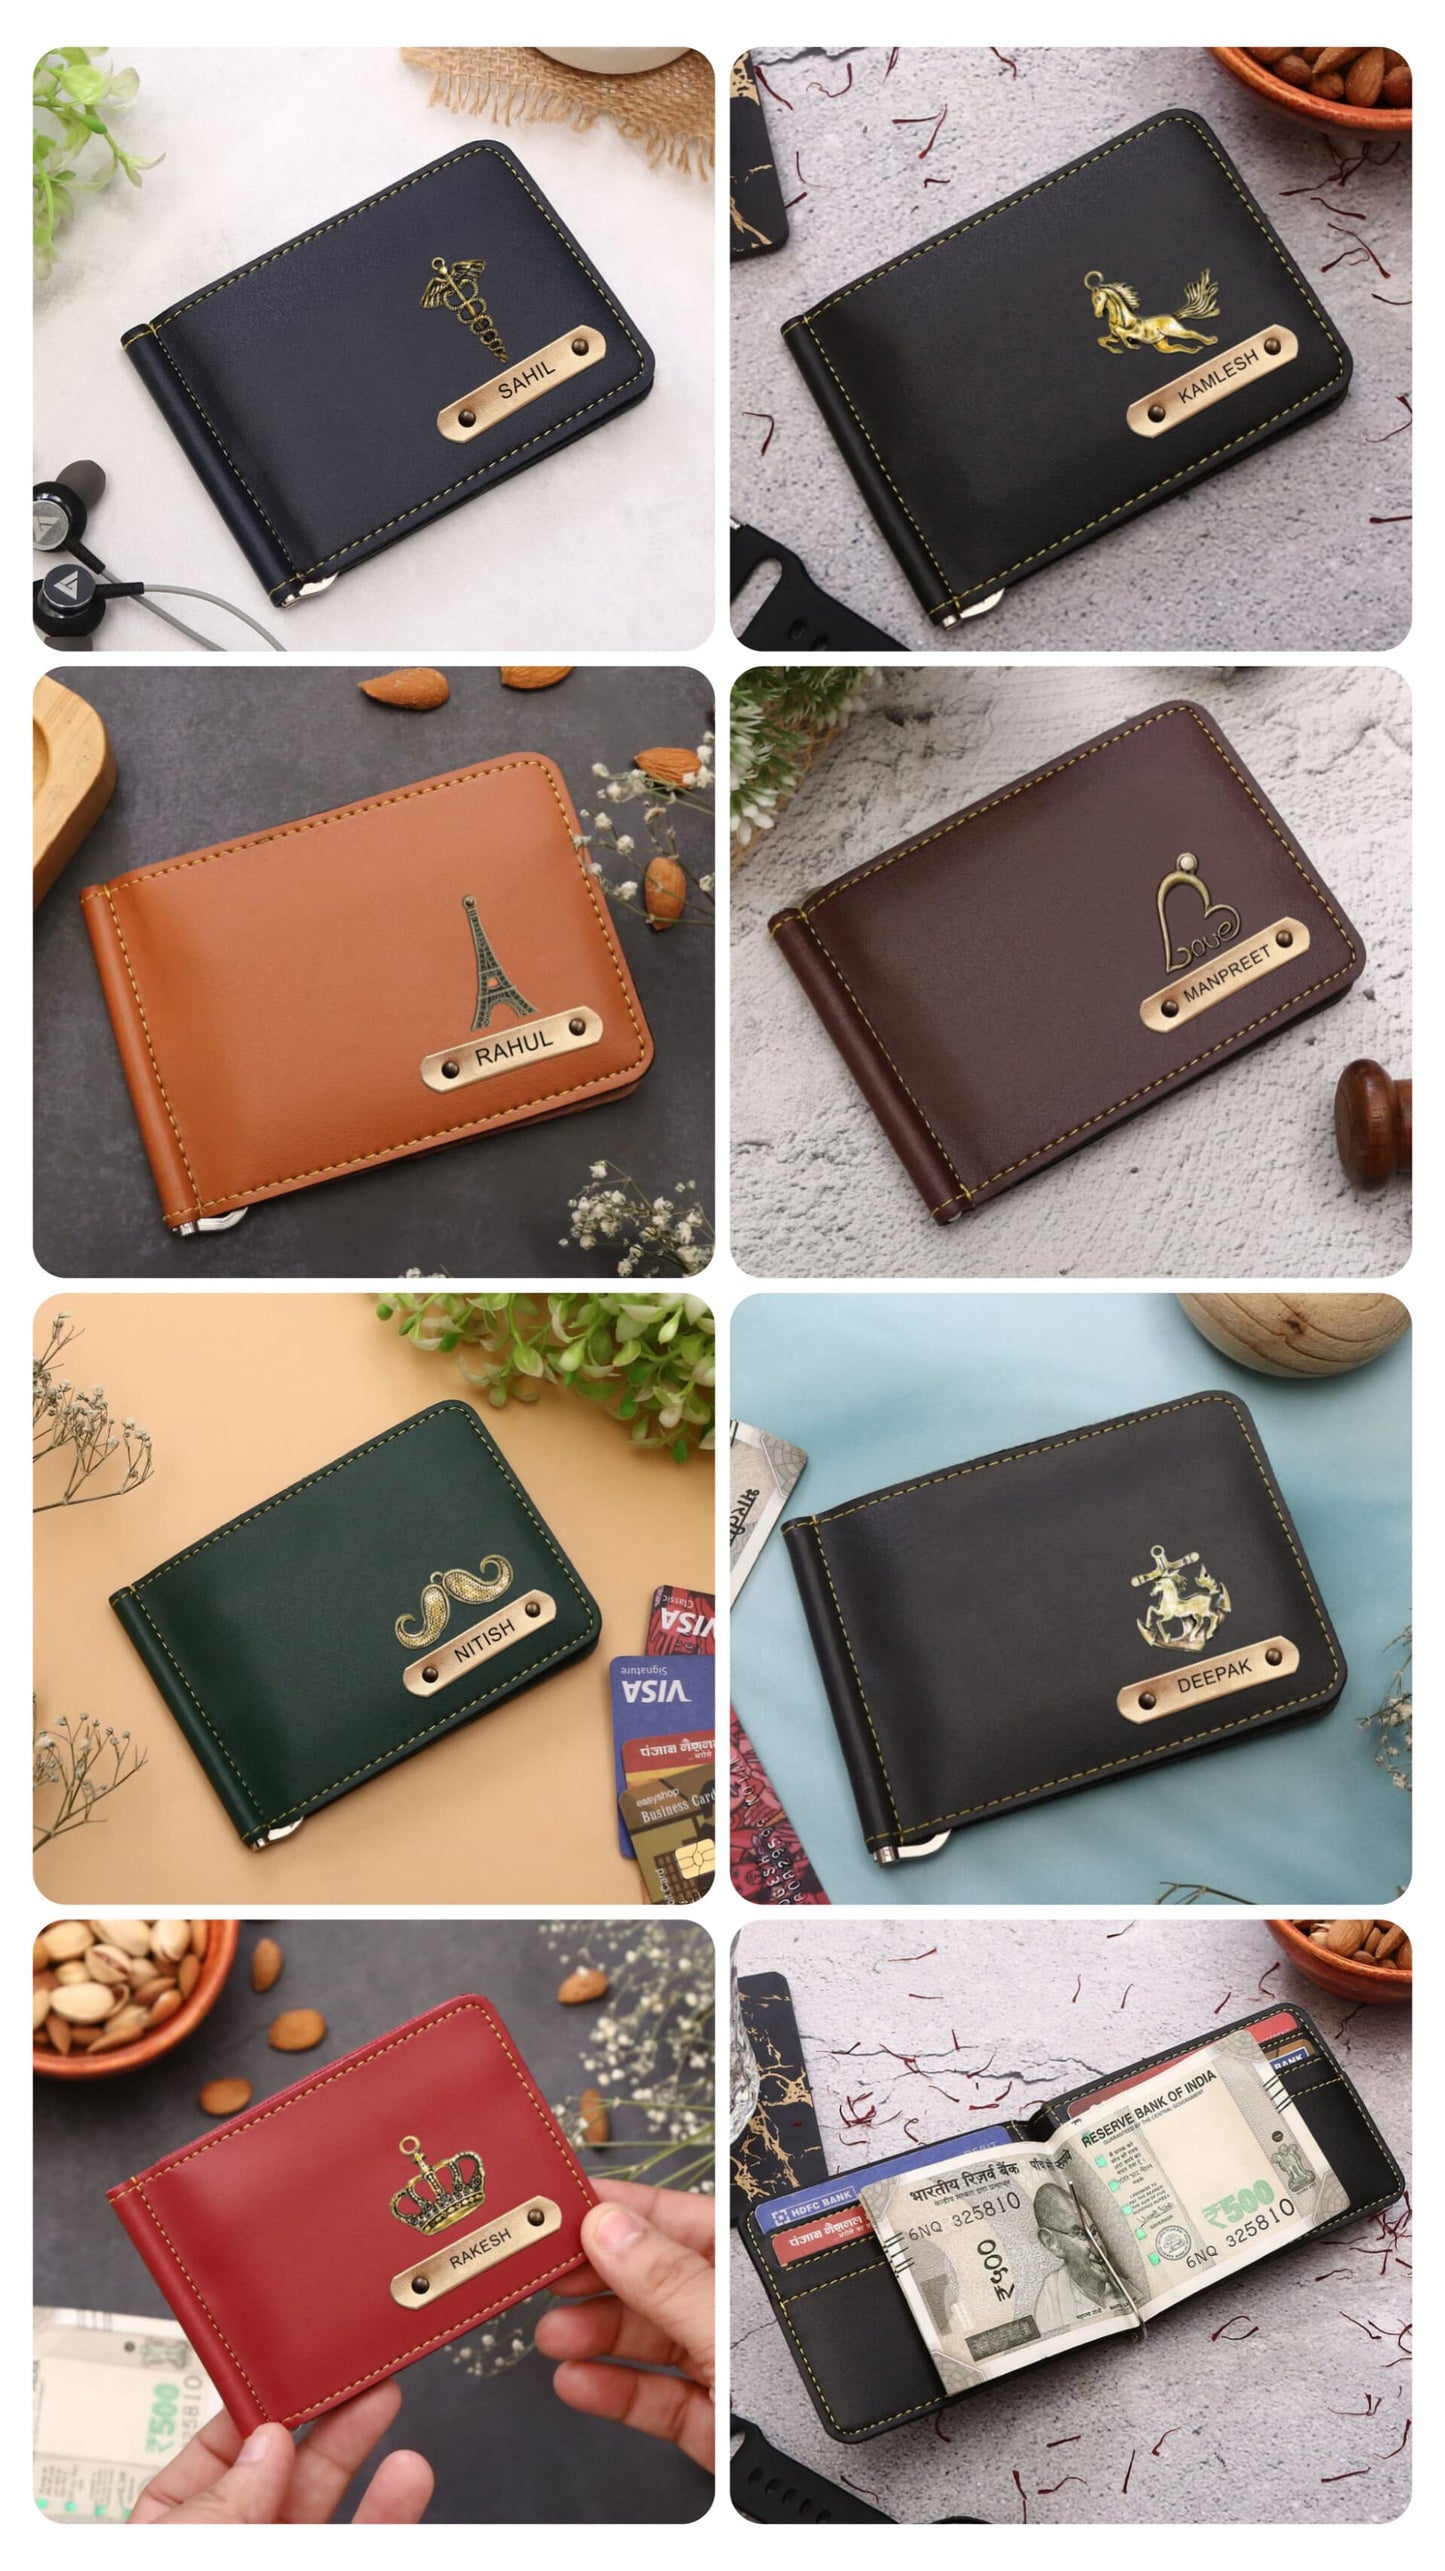 Leather Customized Money clipper Wallet for men